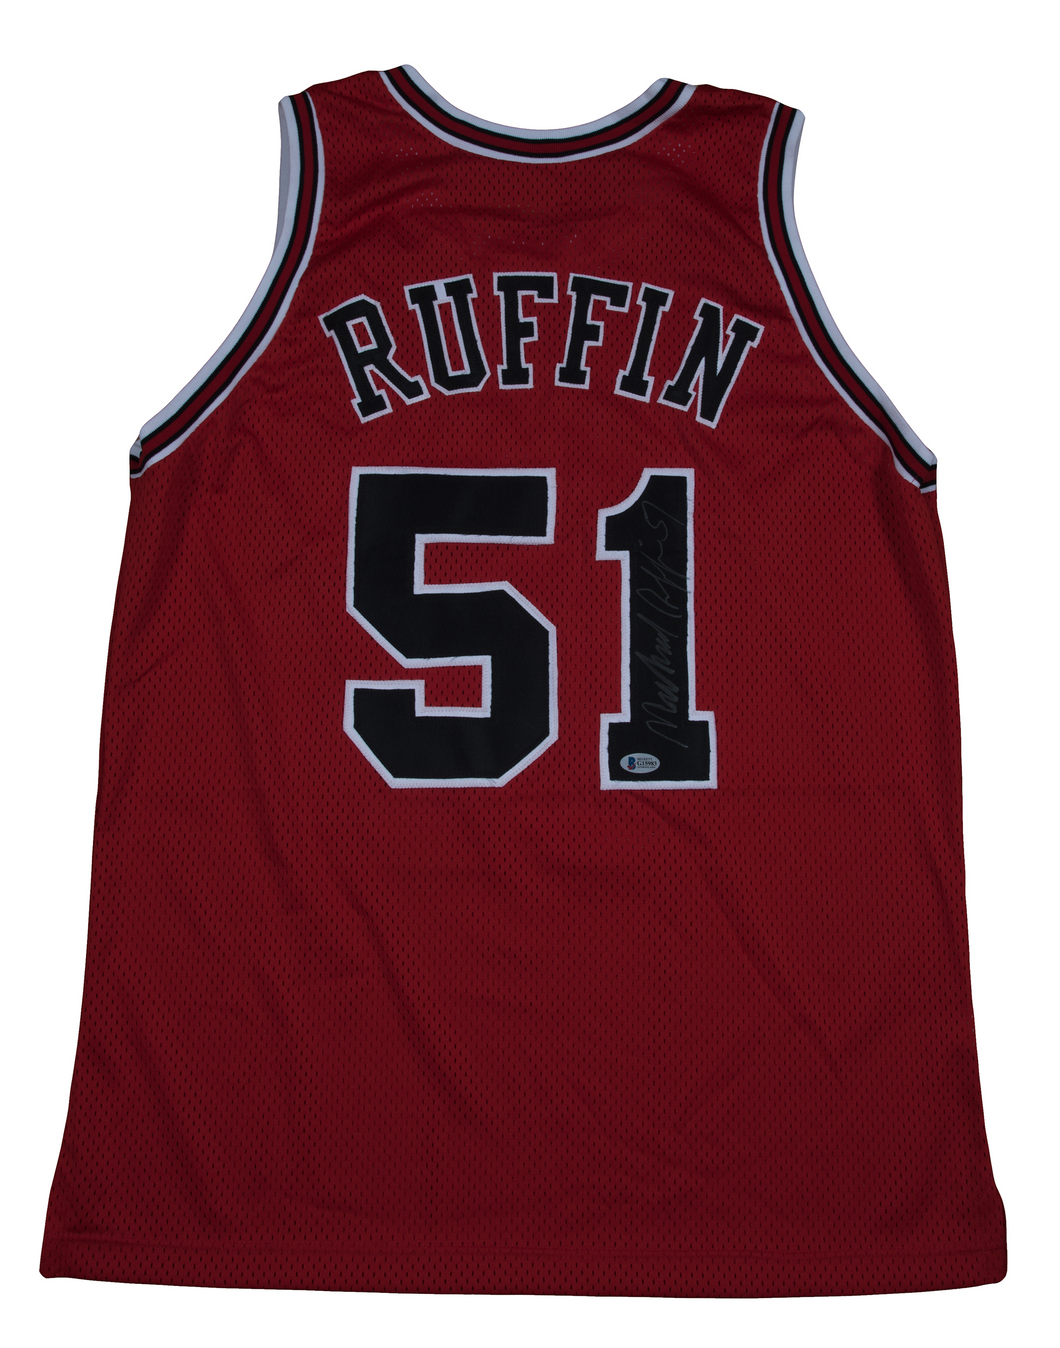 Michael Ruffin Autographed Chicago Bulls Jersey